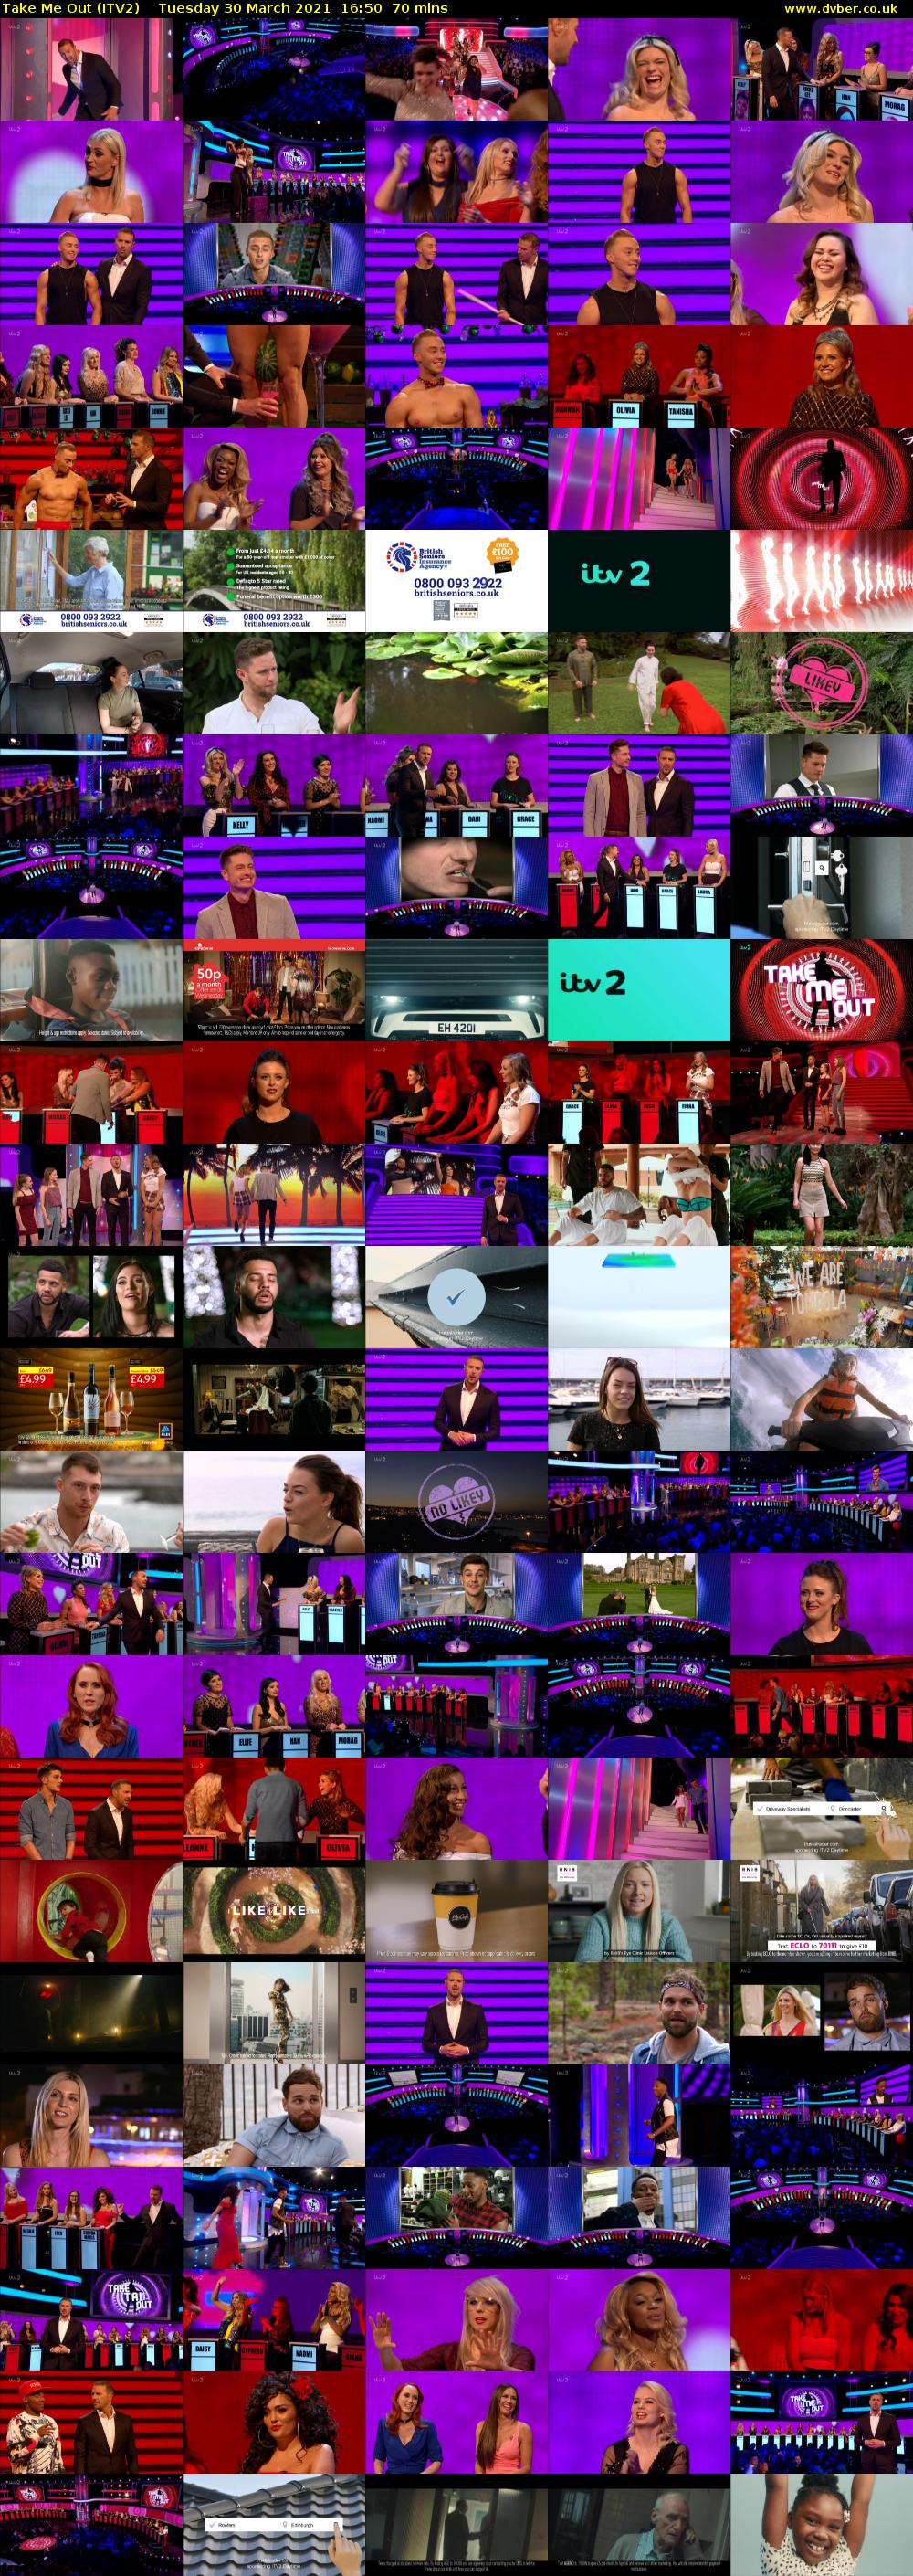 Take Me Out (ITV2) Tuesday 30 March 2021 16:50 - 18:00